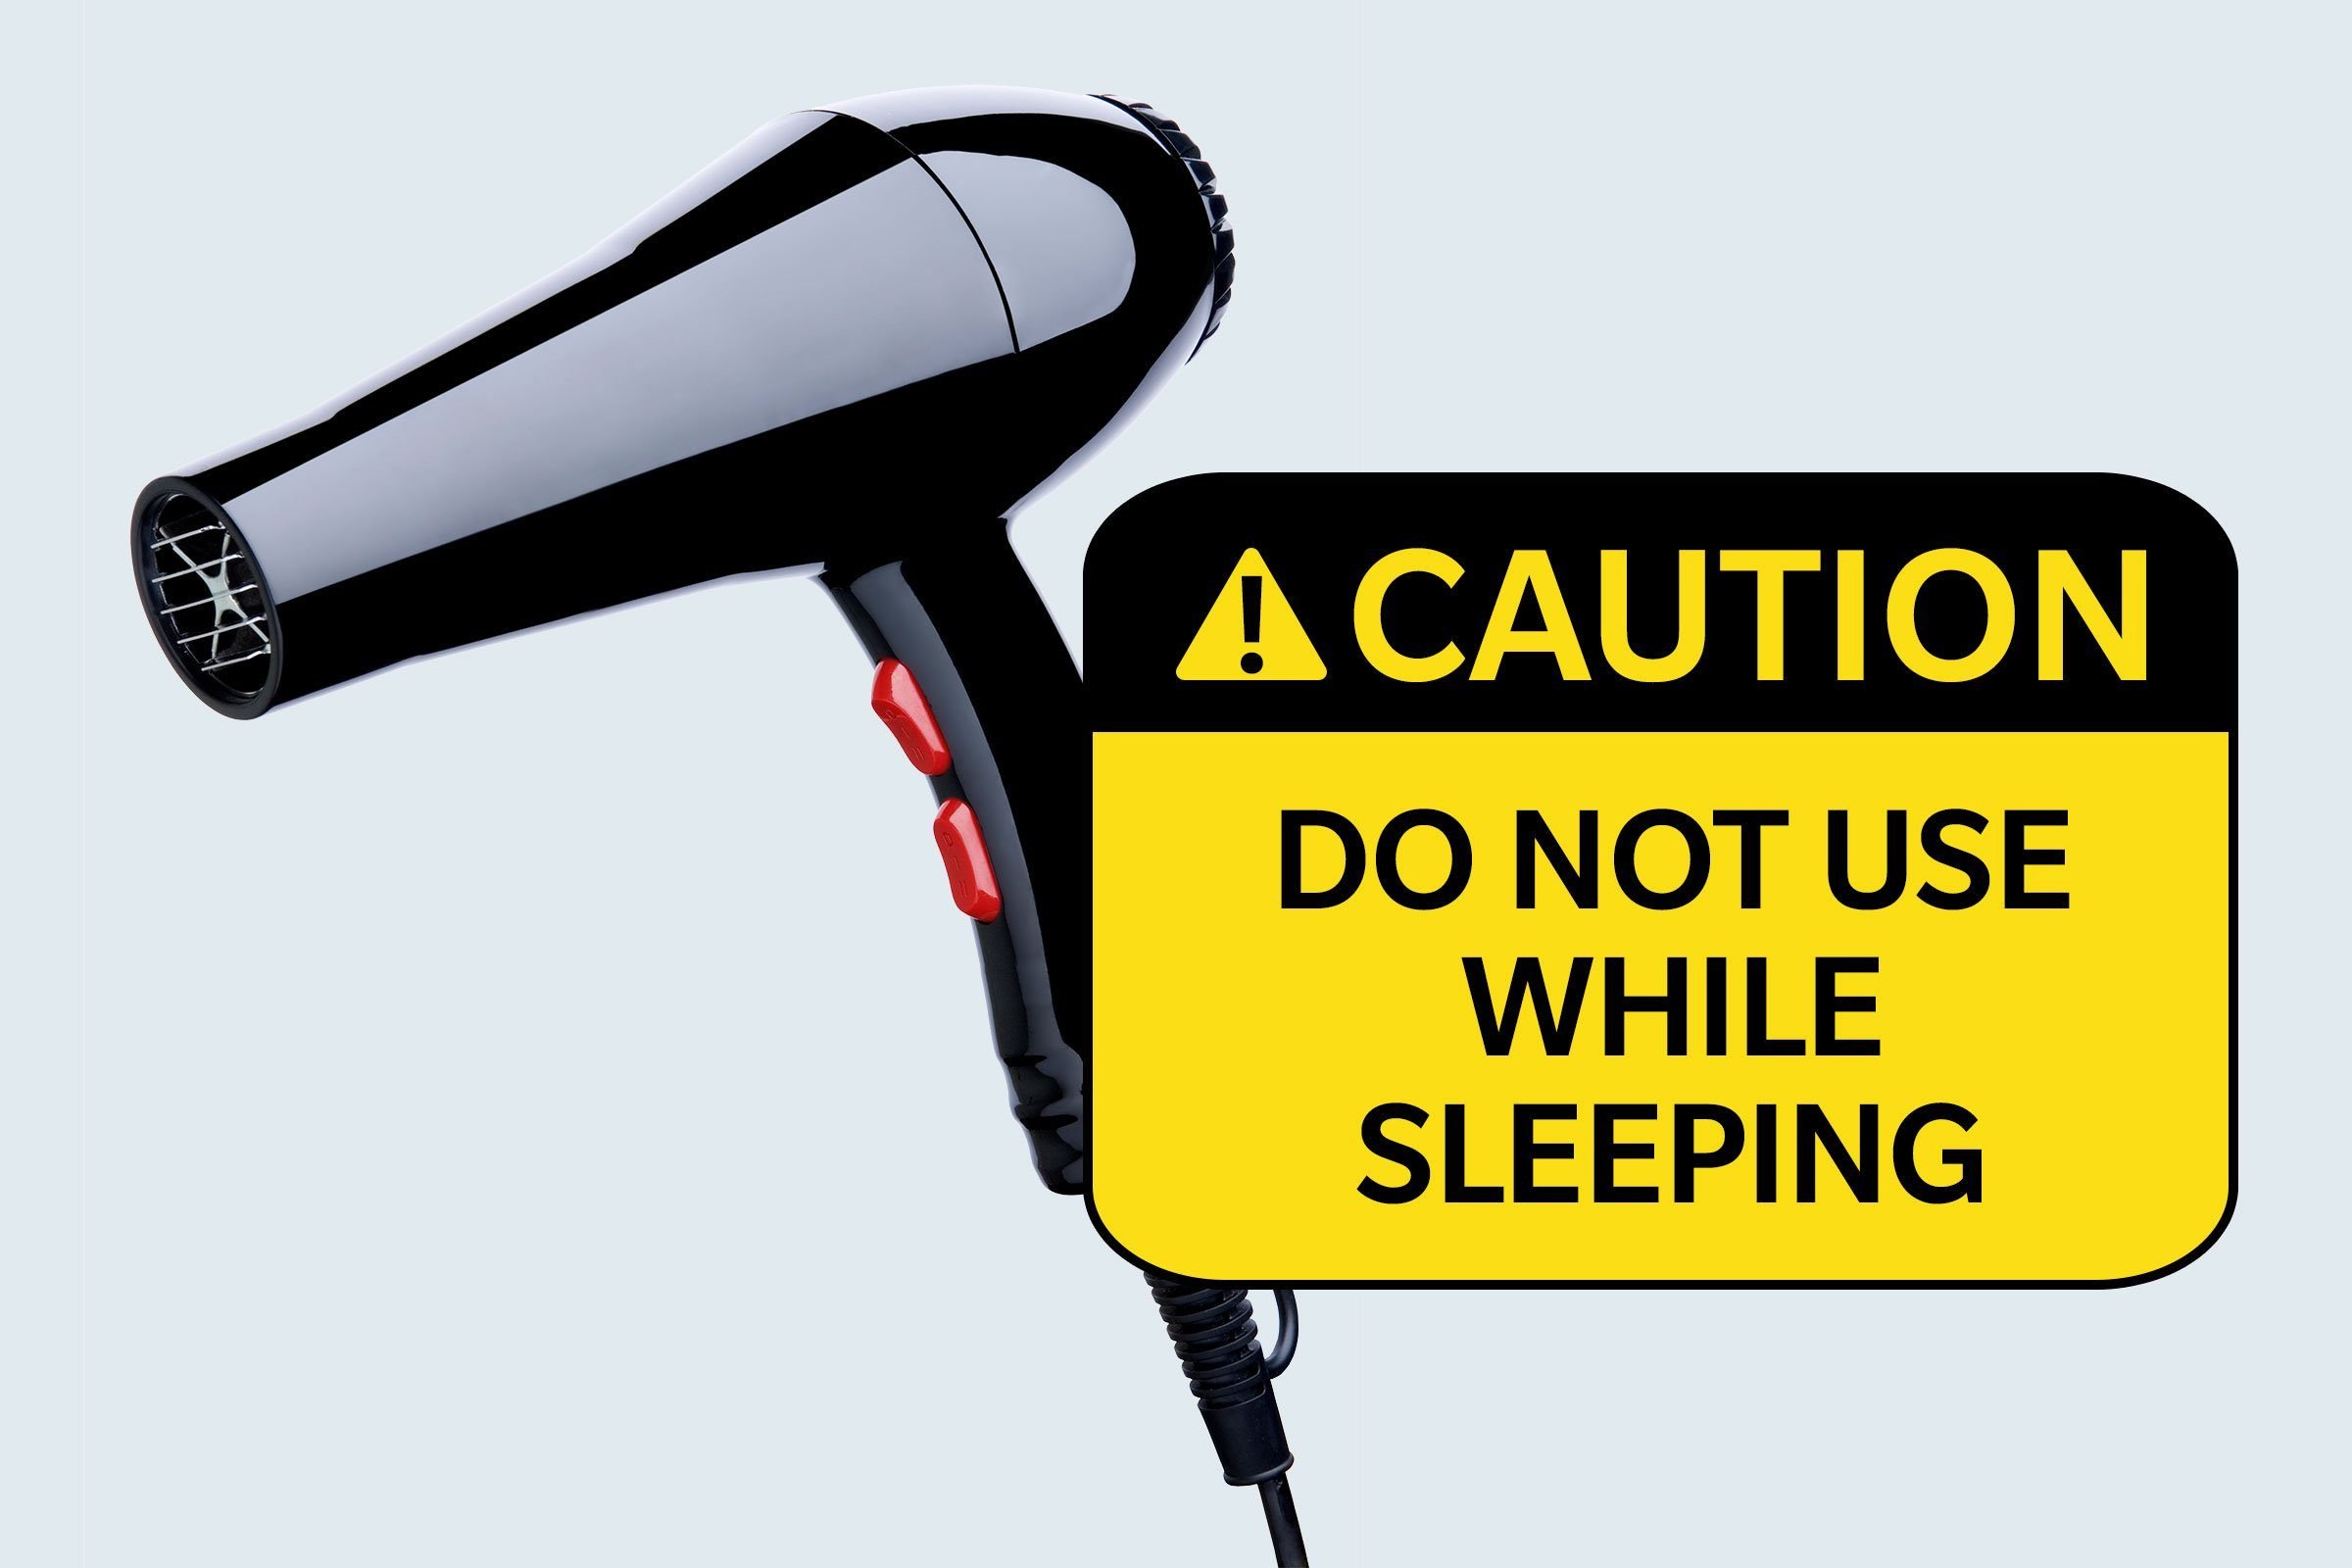 hairdryer. caution: do not use while sleeping